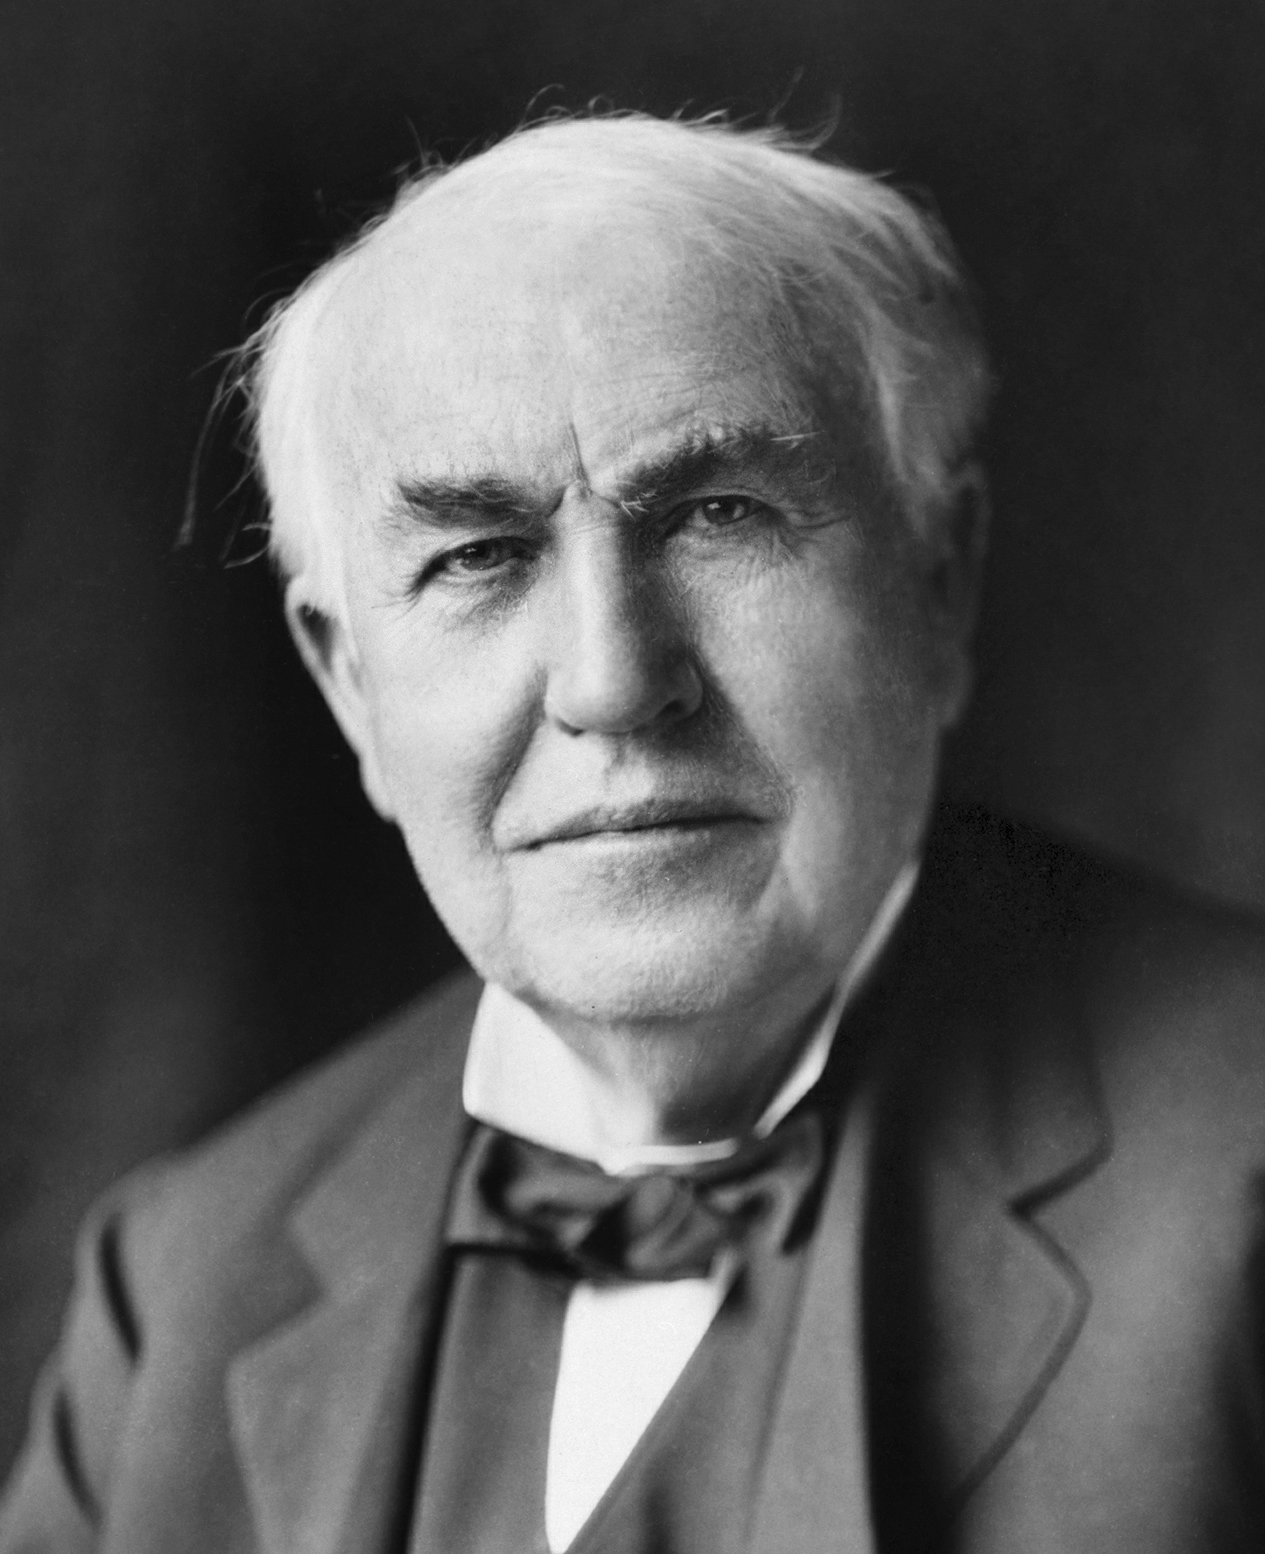 Thomas A. Edison the Inventor, biography, facts and quotes